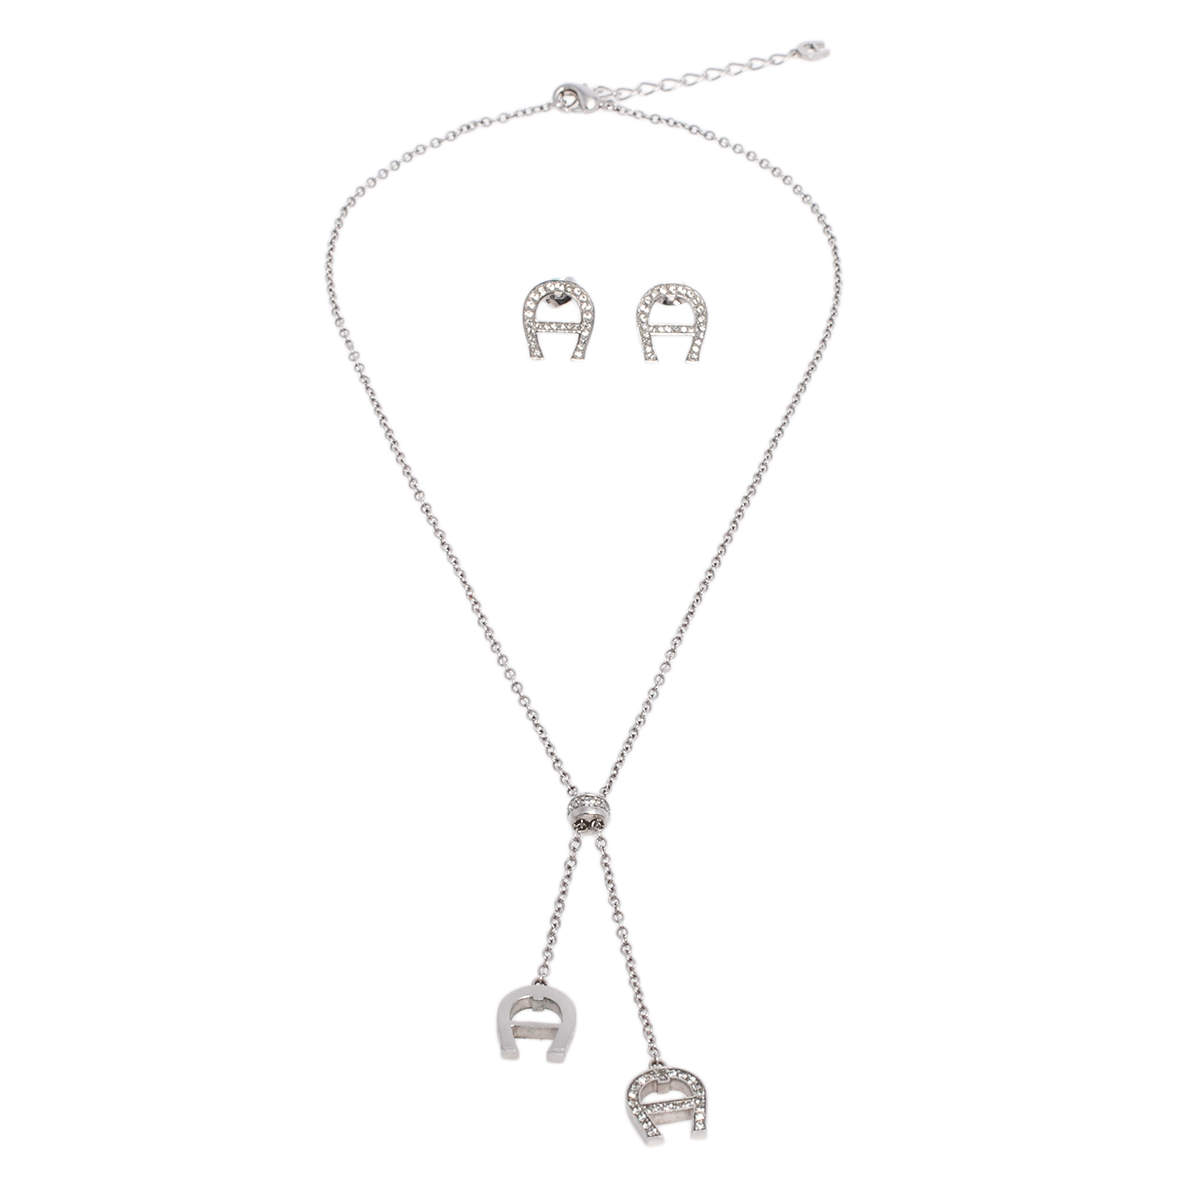 Aigner Crystal Logo Silver Tone Earrings and Necklace Set